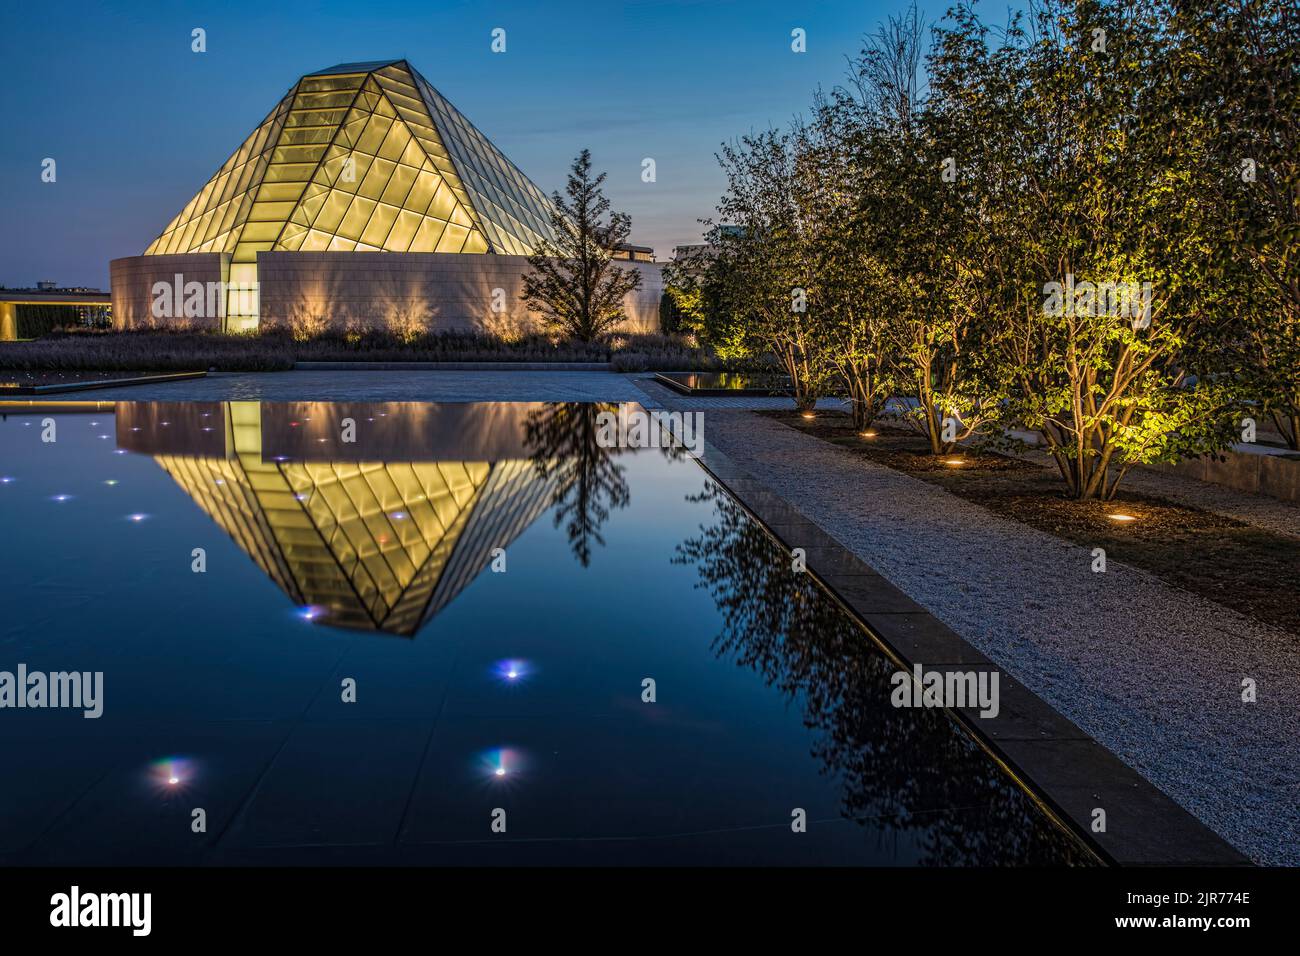 The Ismaili Centre is a Muslim prayer hall in North York, Ontario, just five reflecting pools away from the Aga Khan Museum. Stock Photo